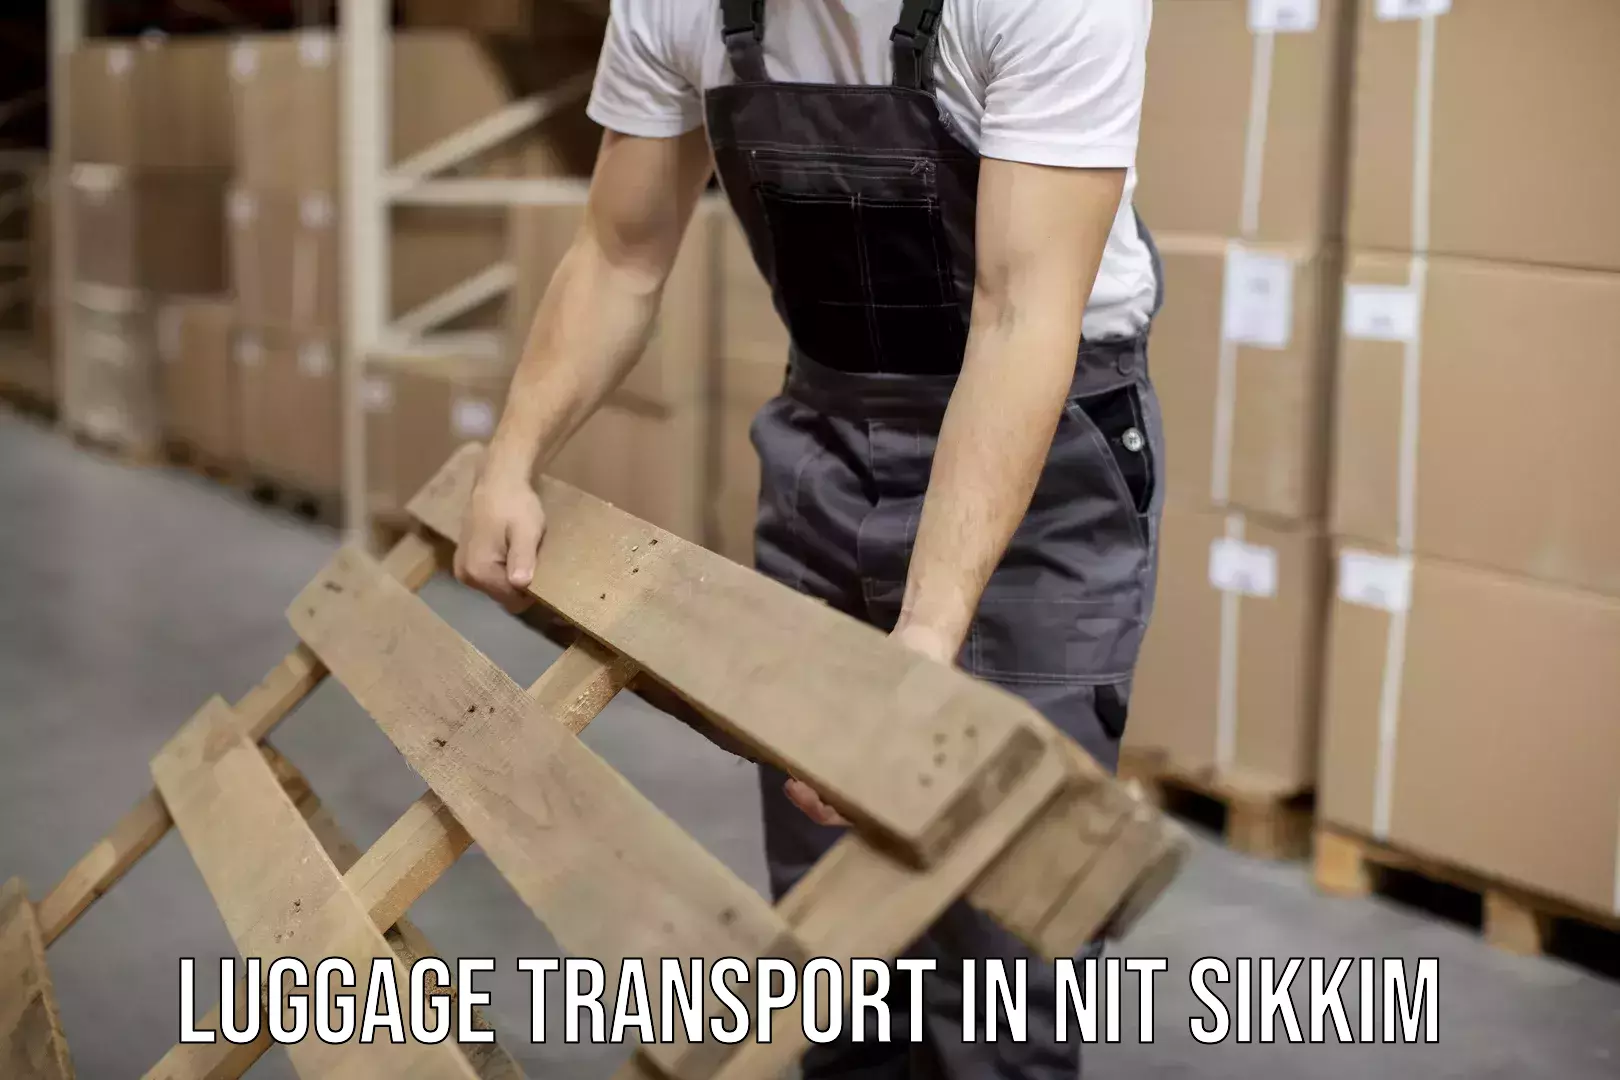 Luggage forwarding service in NIT Sikkim